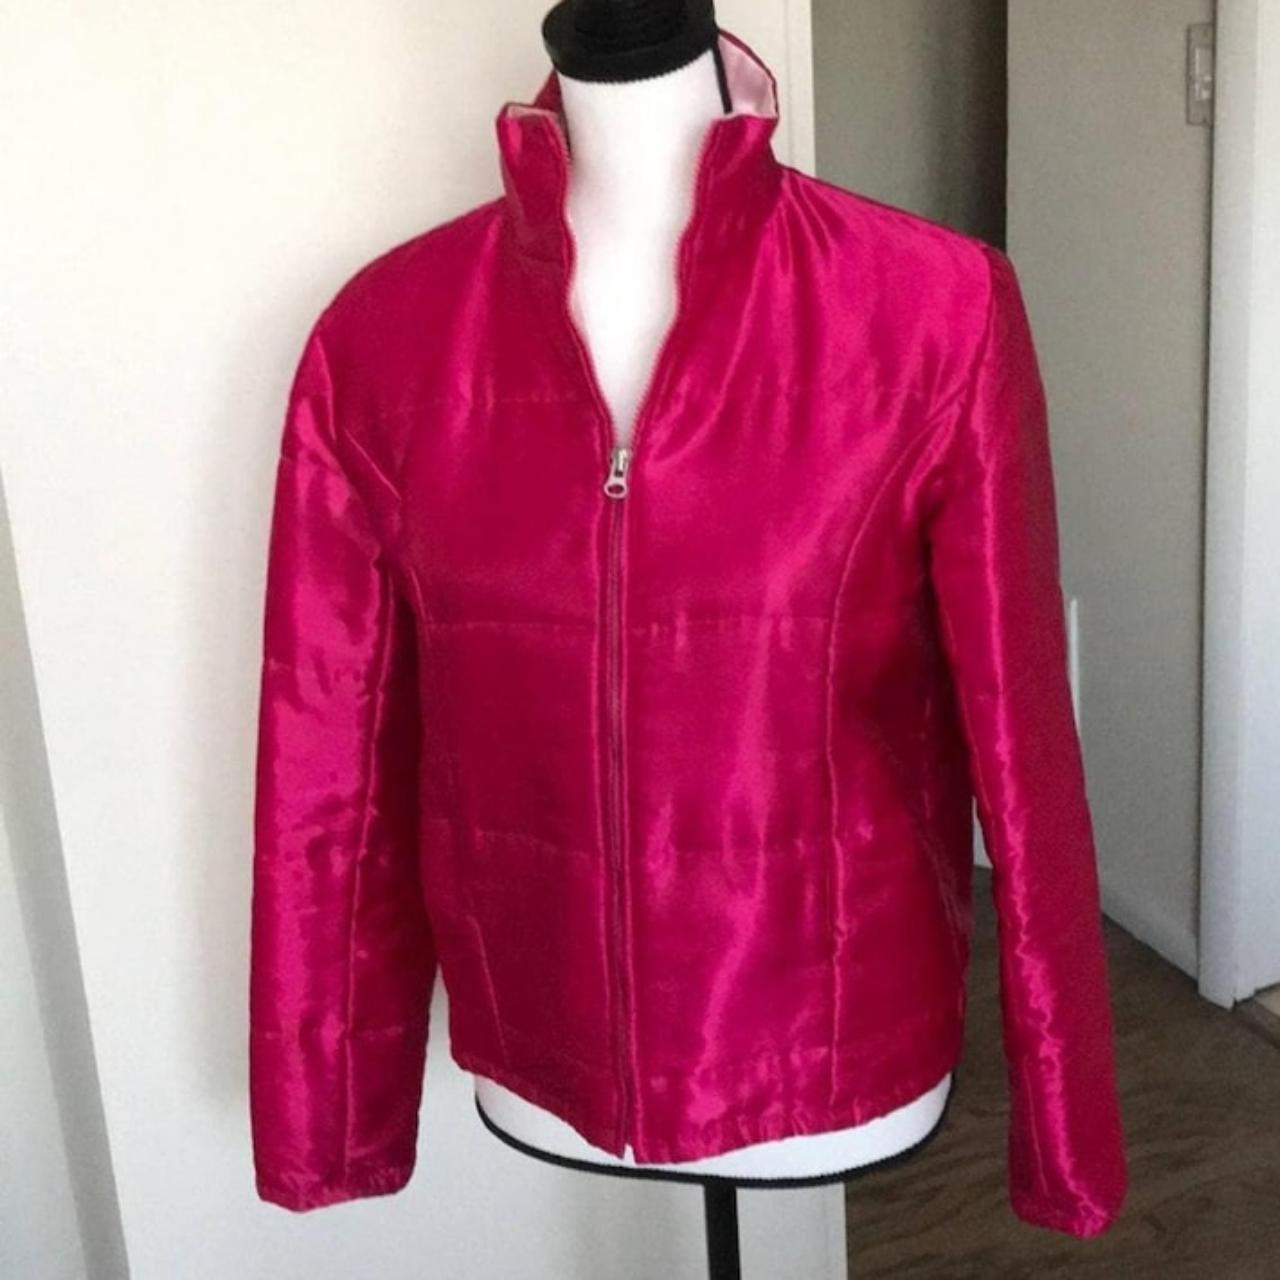 ️ Hot pink quilted jacket, silky fuchsia short... - Depop